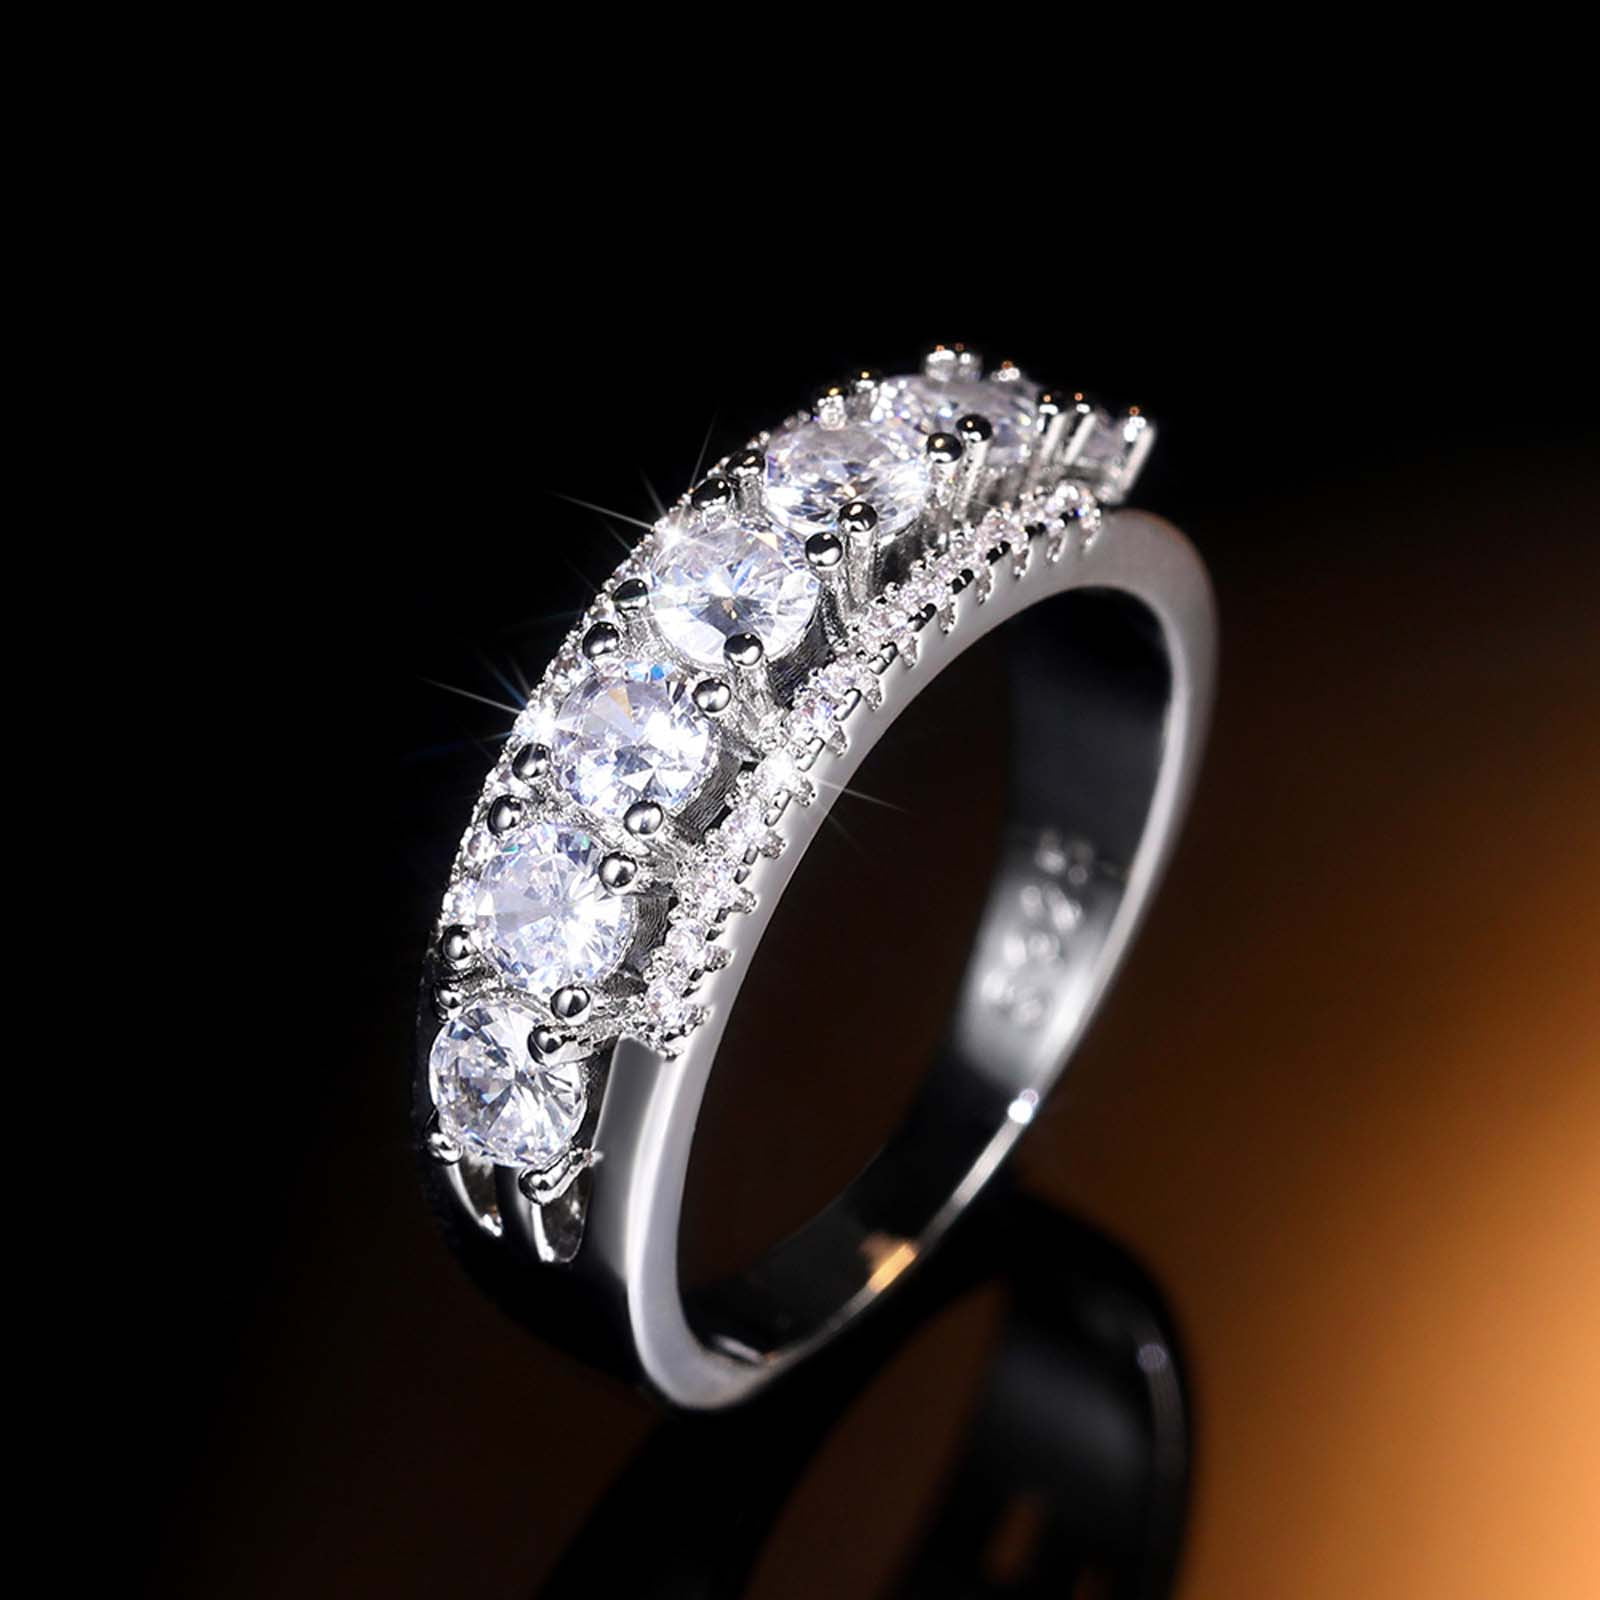 Details about   .5 Ct Natural Authentic Emerald Moissanite Ring Women Wedding Birthday Jewelry